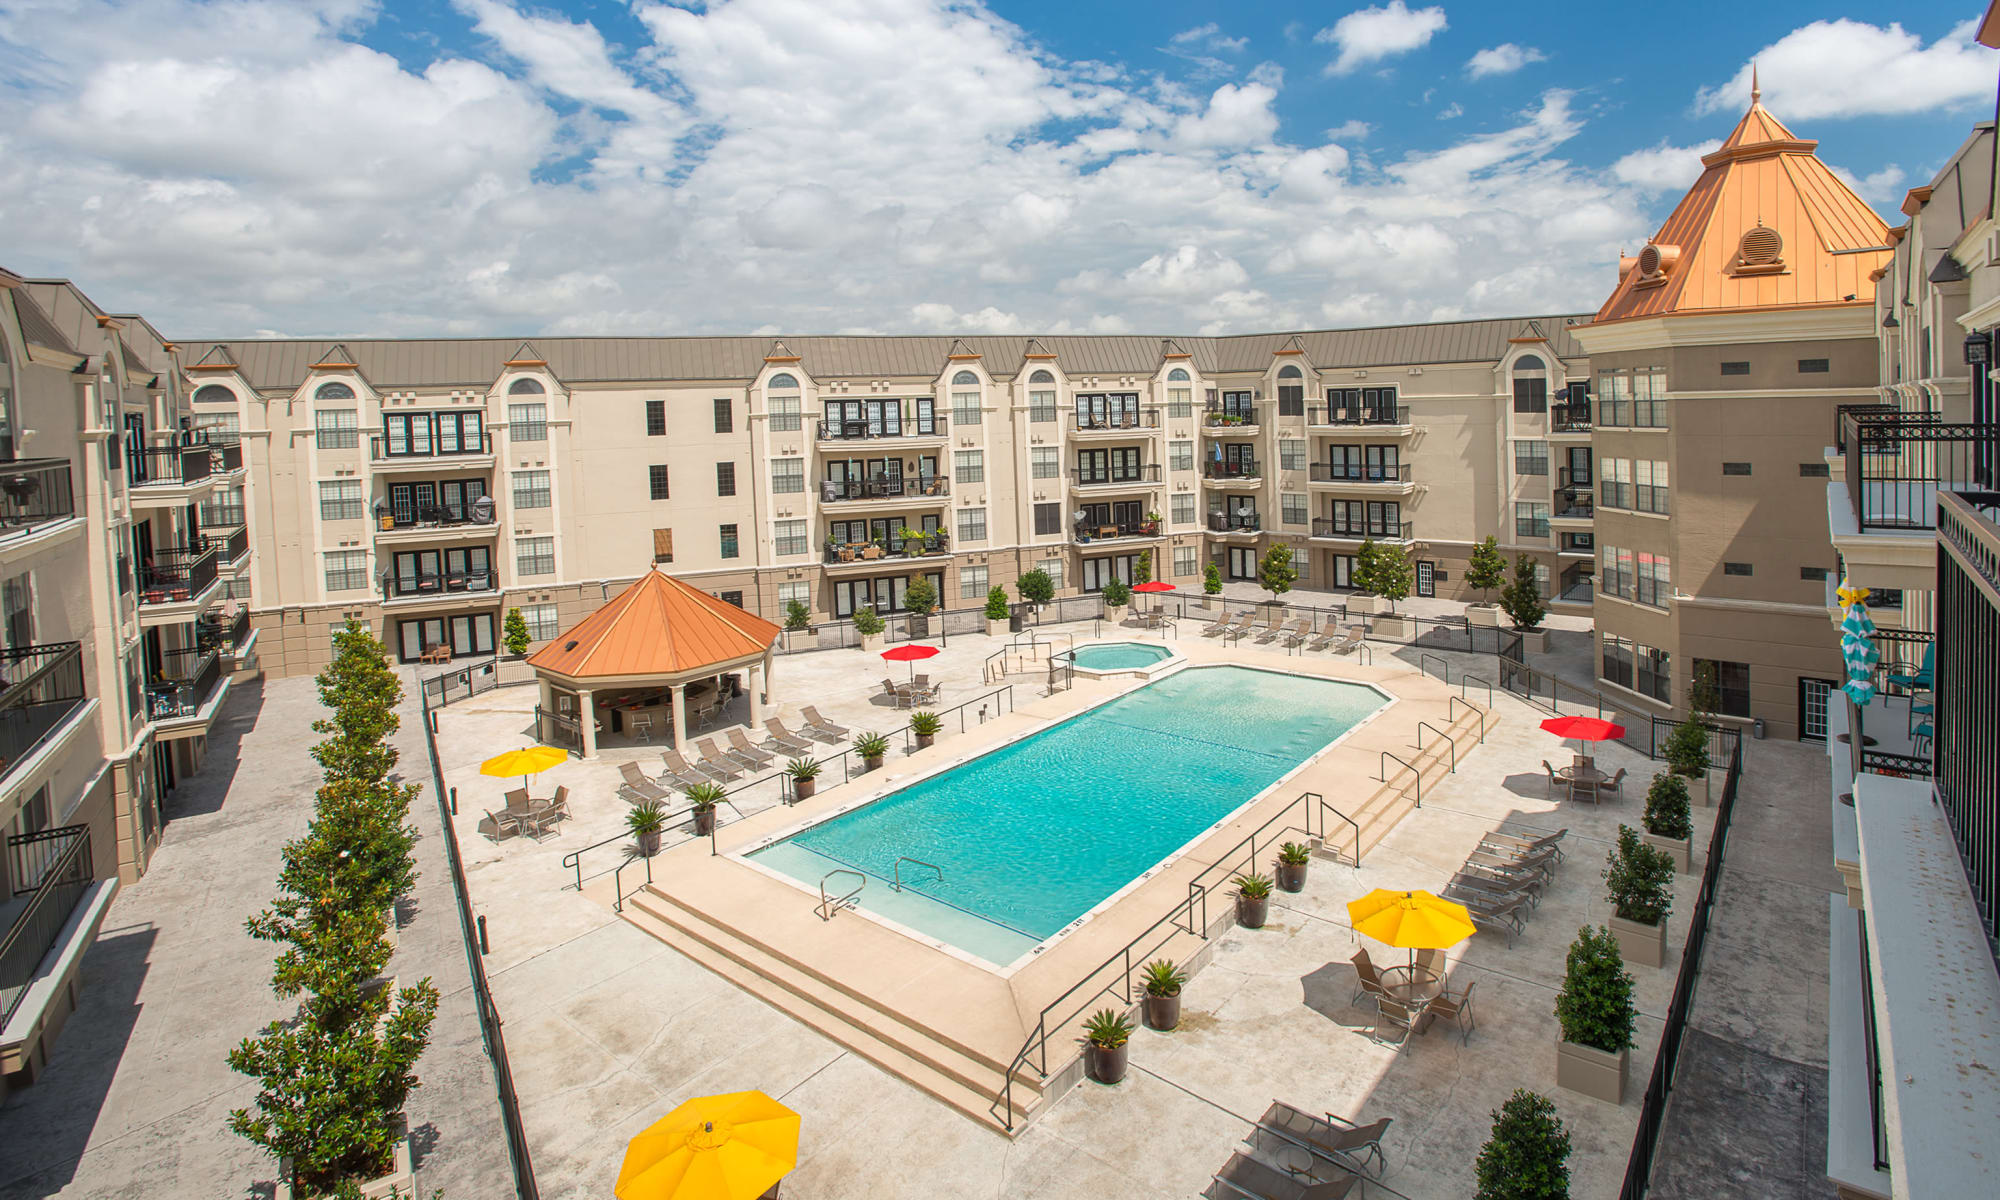 Apartments at Chateau de Ville in Farmers Branch, Texas 